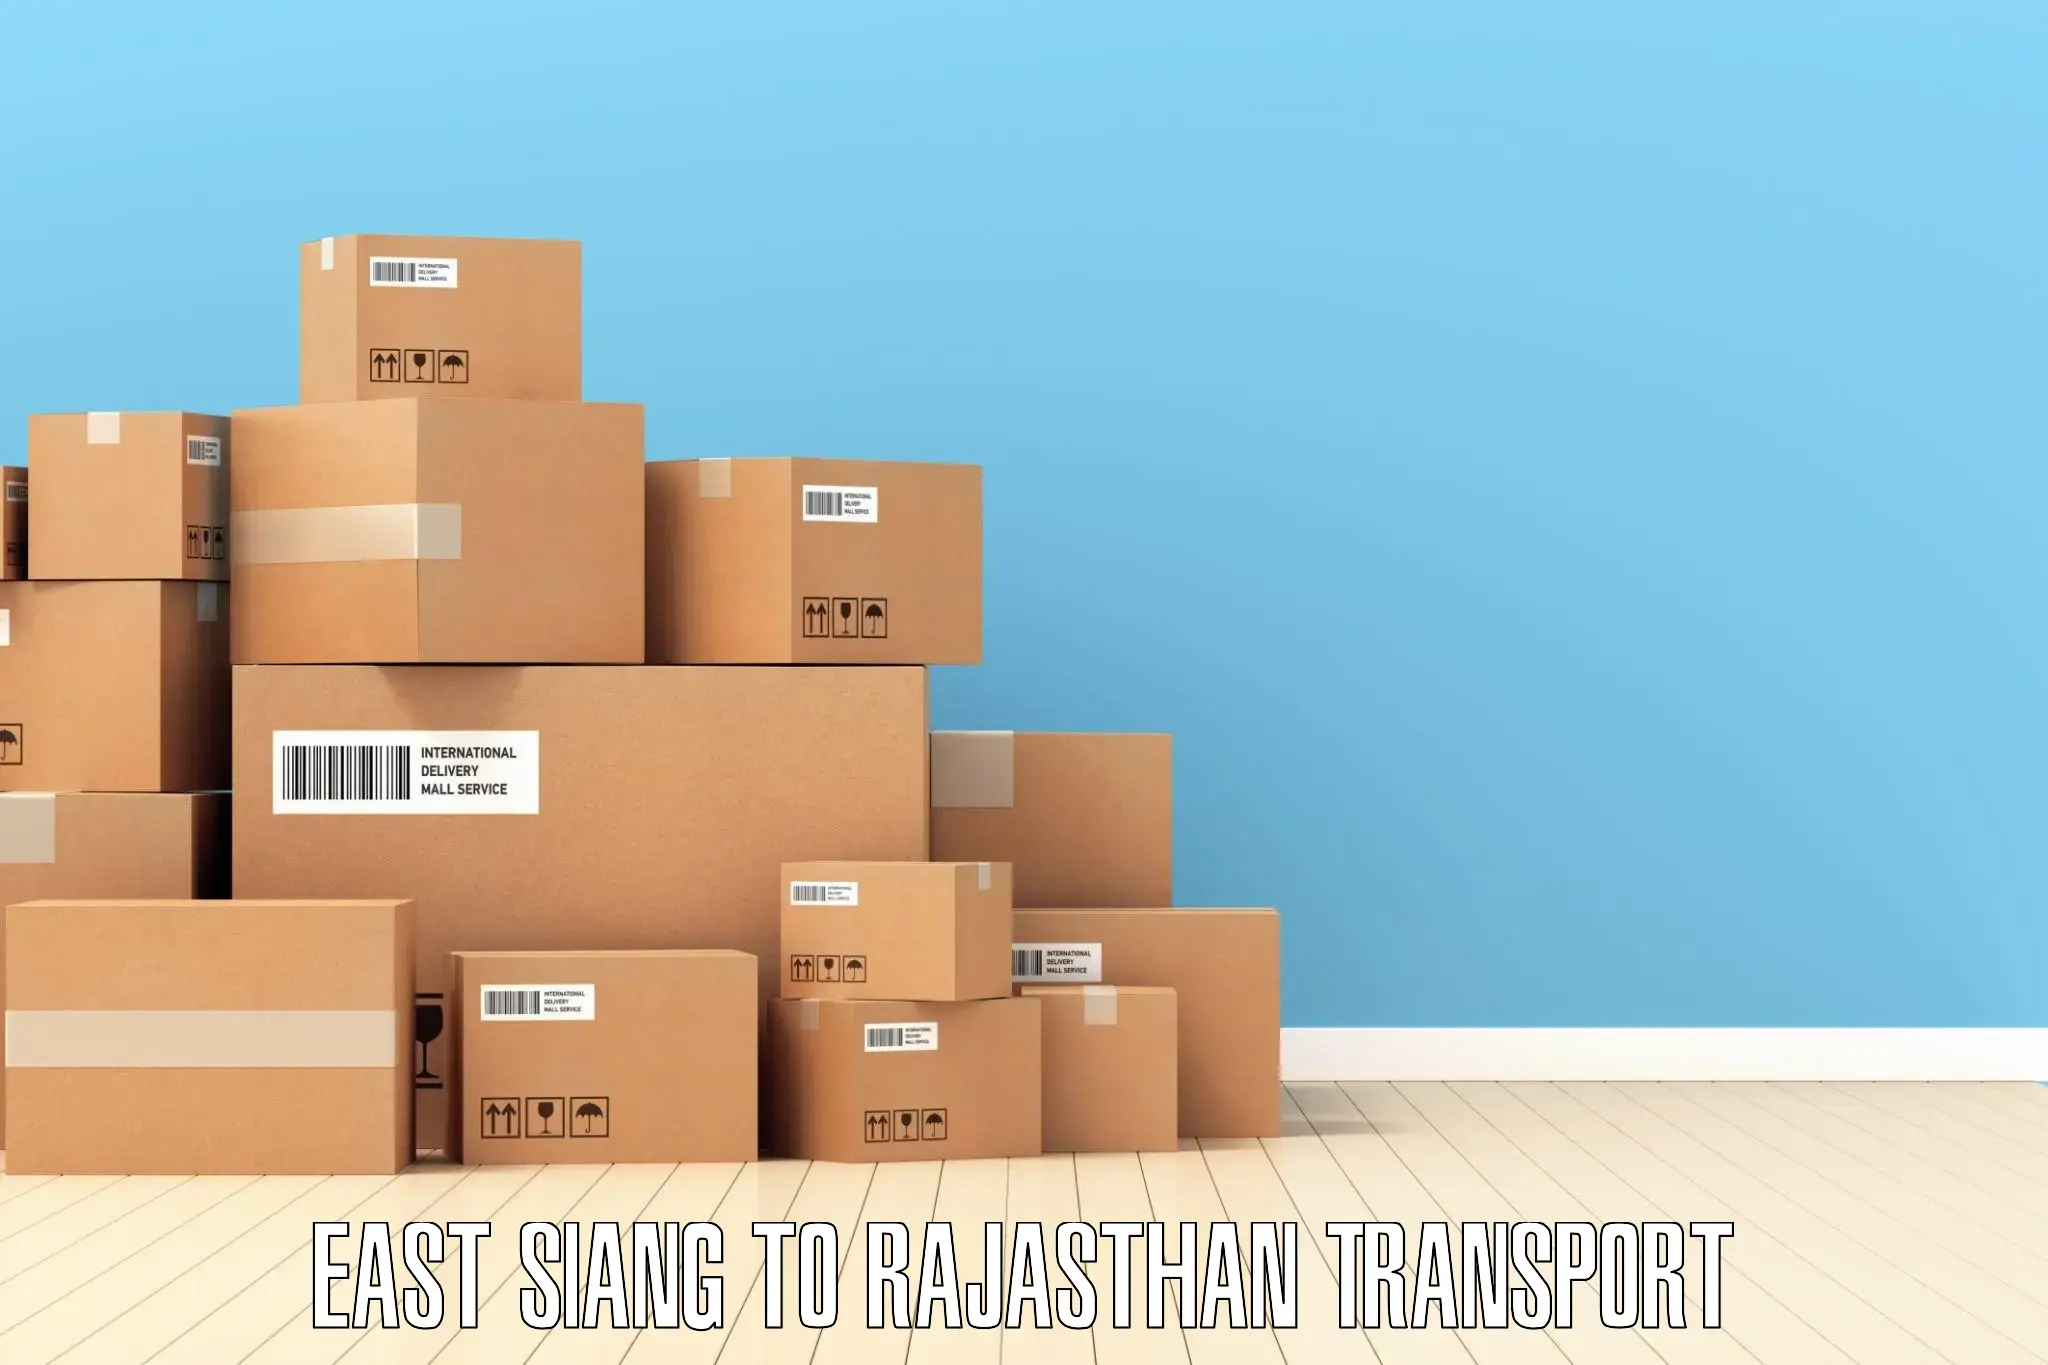 Commercial transport service in East Siang to Rajasthan